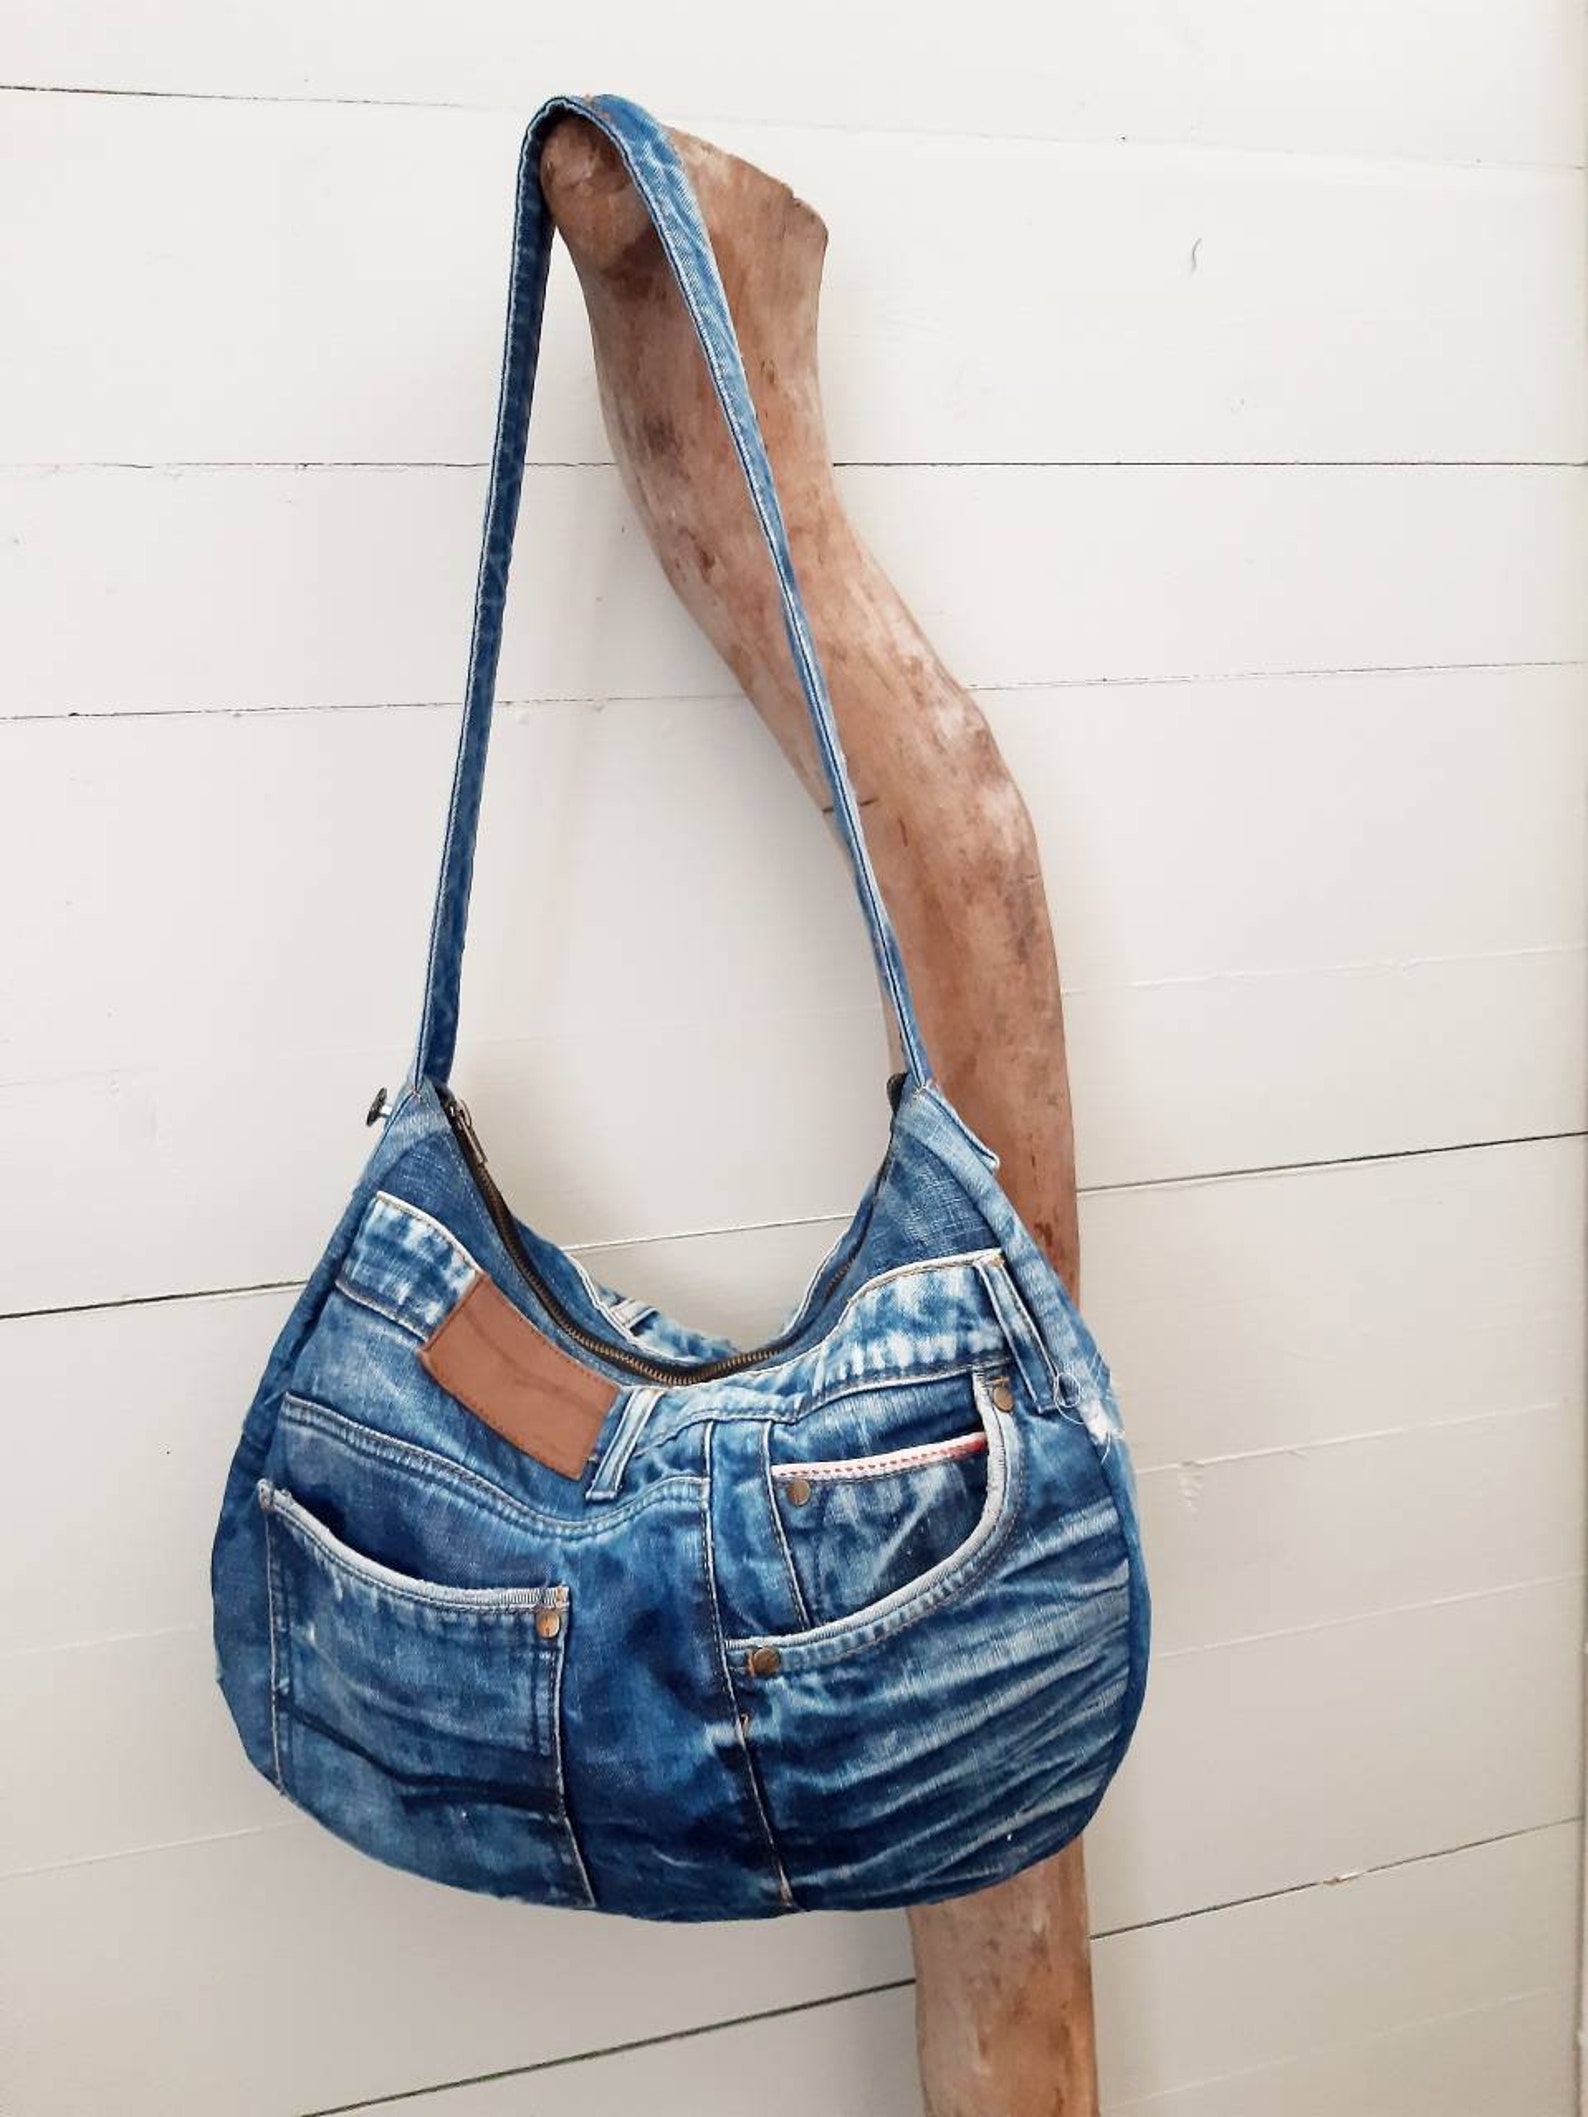 Faded Patched up hobo bag Jeans bag Jeans hobo bag upcycled | Etsy